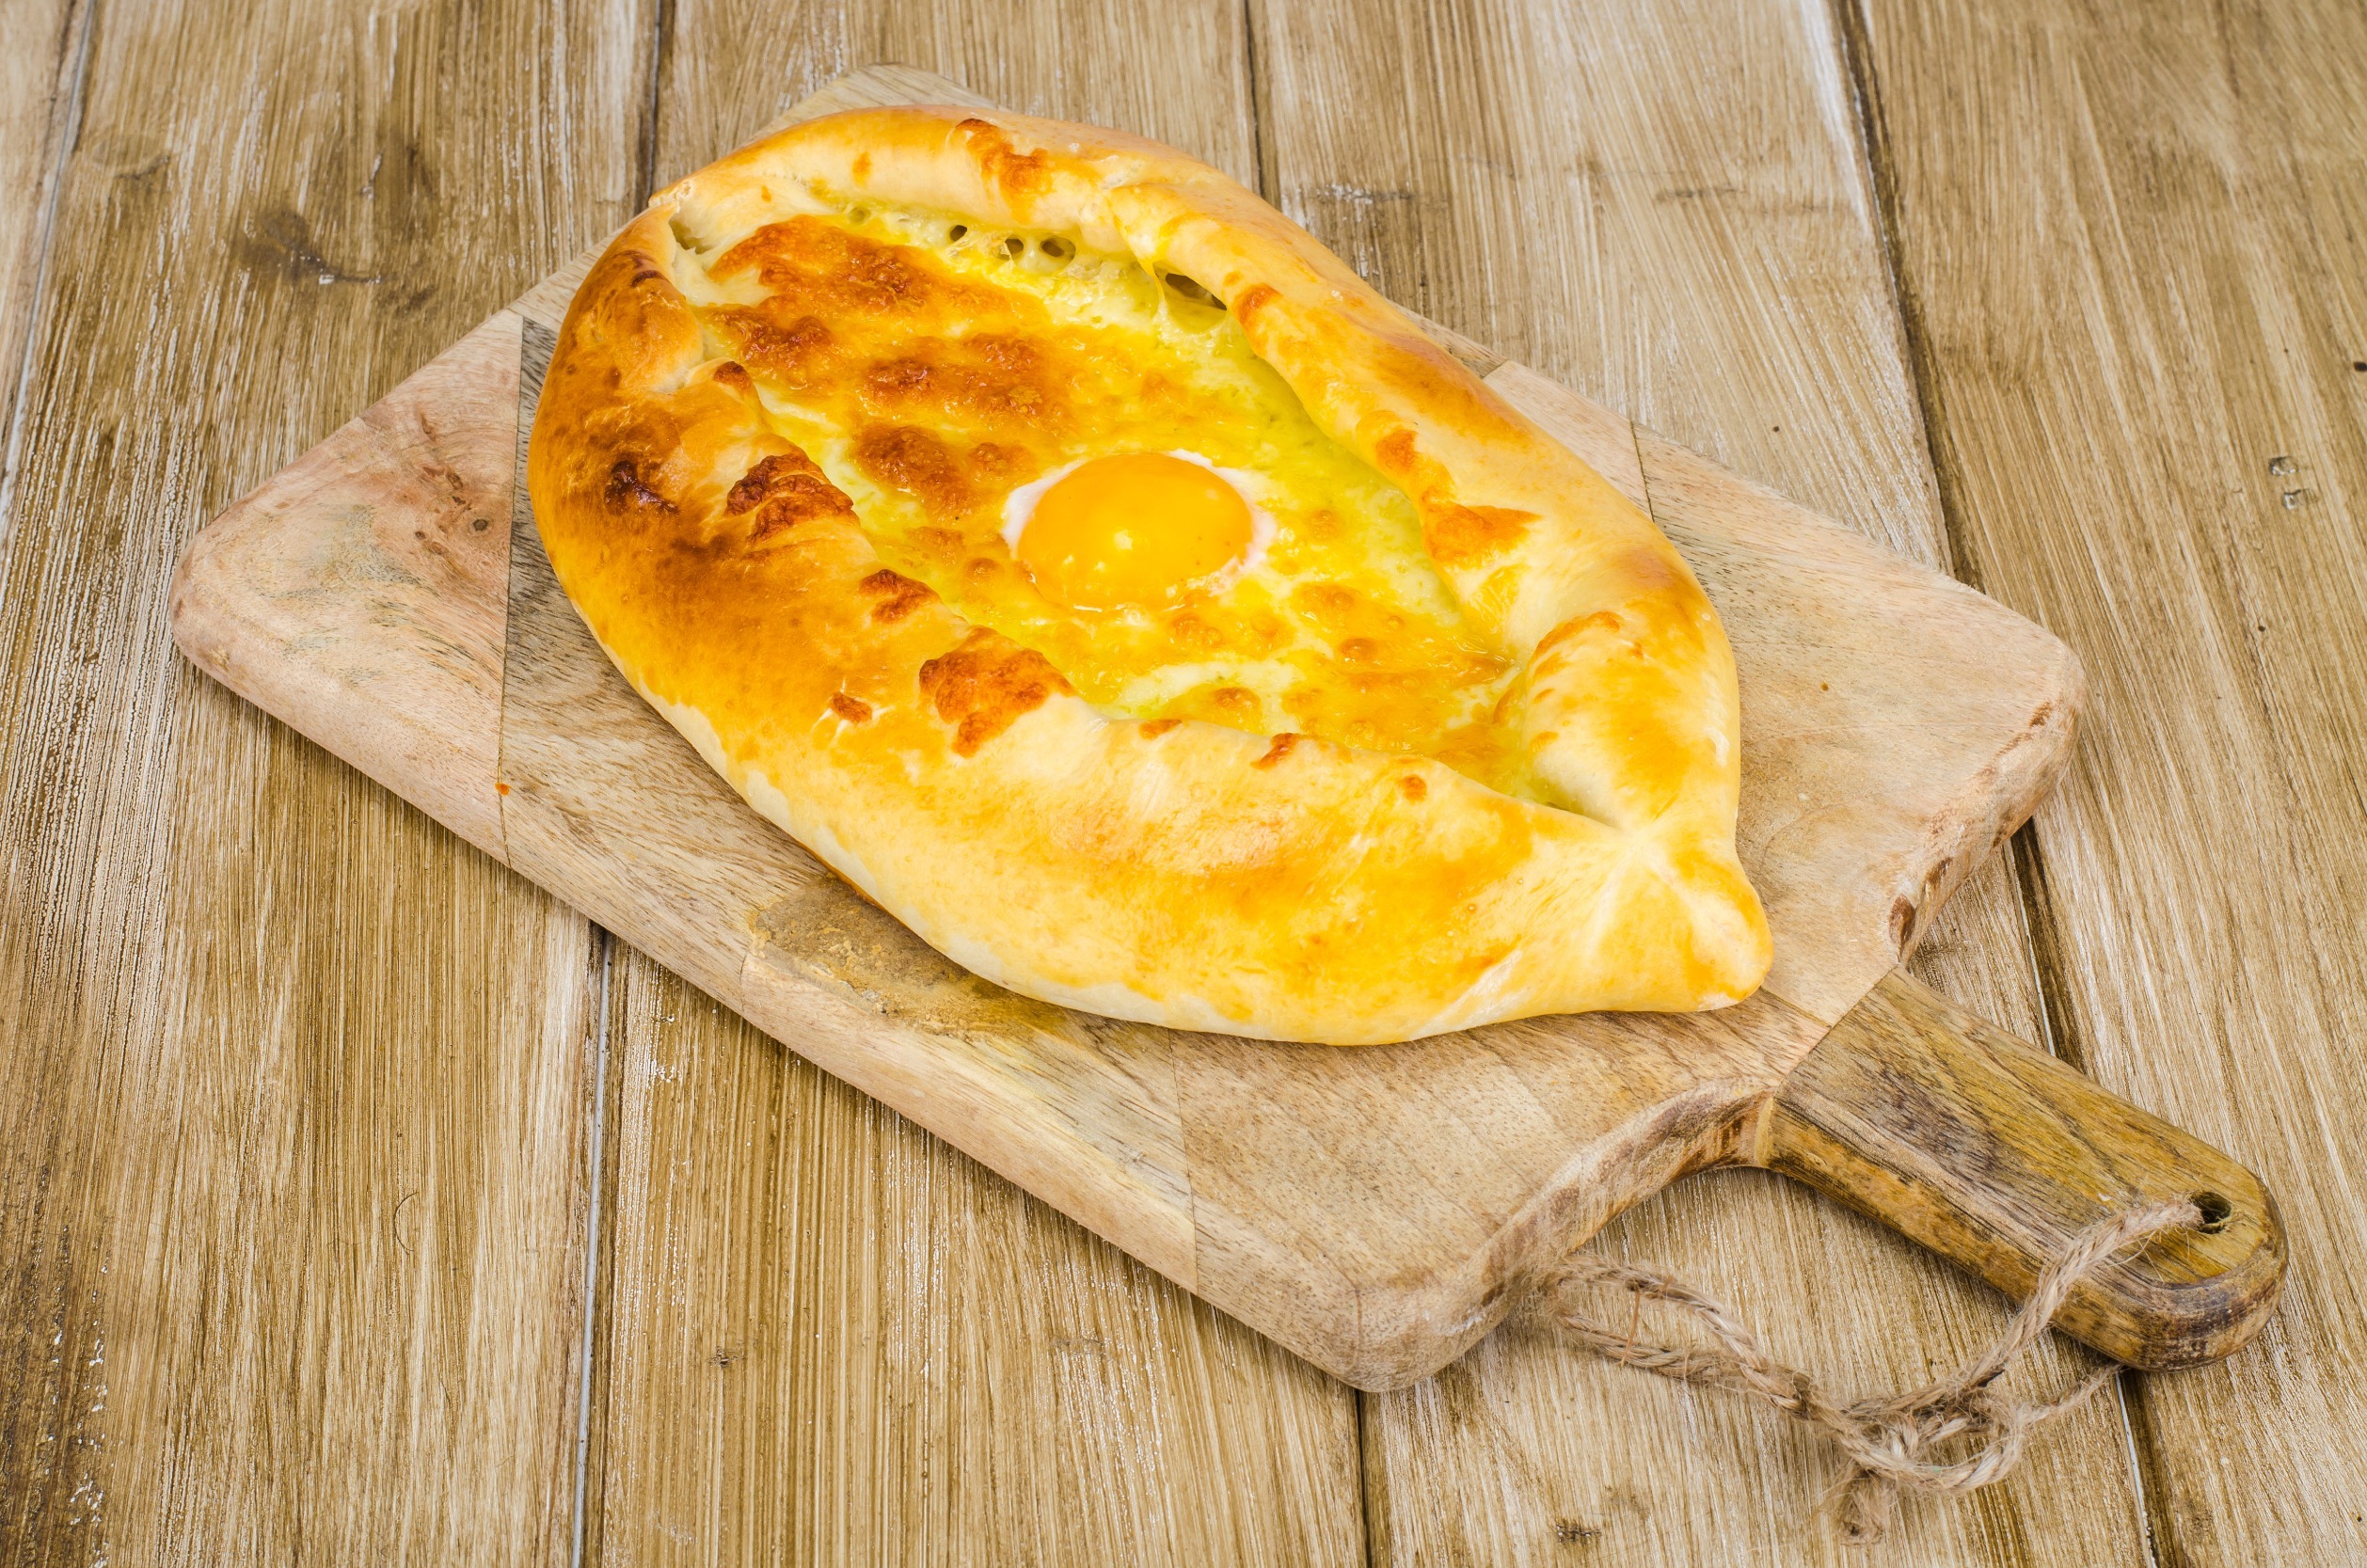 Hot khachapuri with cheese and egg on wooden board